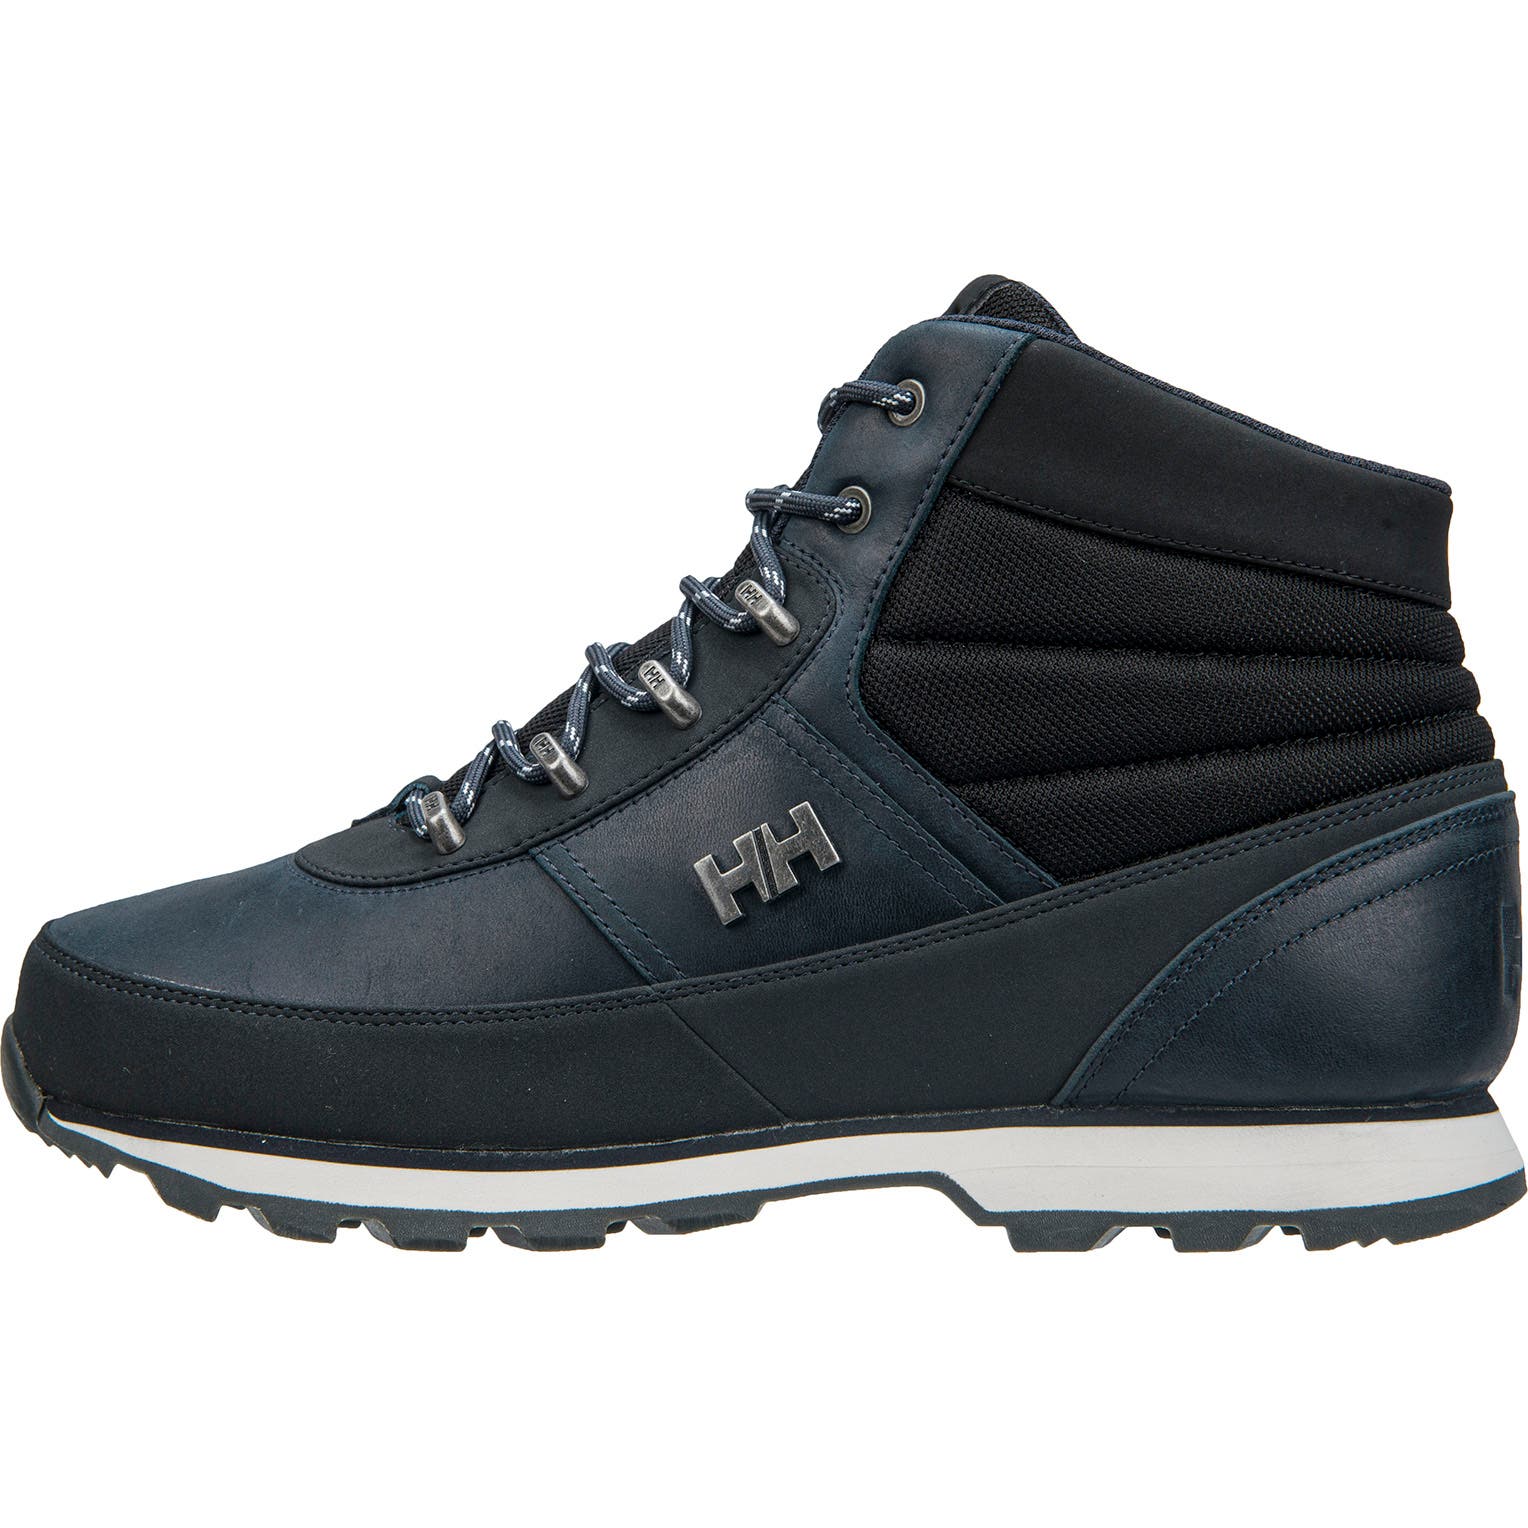 Helly Hansen Men's Woodlands Winter Boot in Navy-Black-Off White from the side